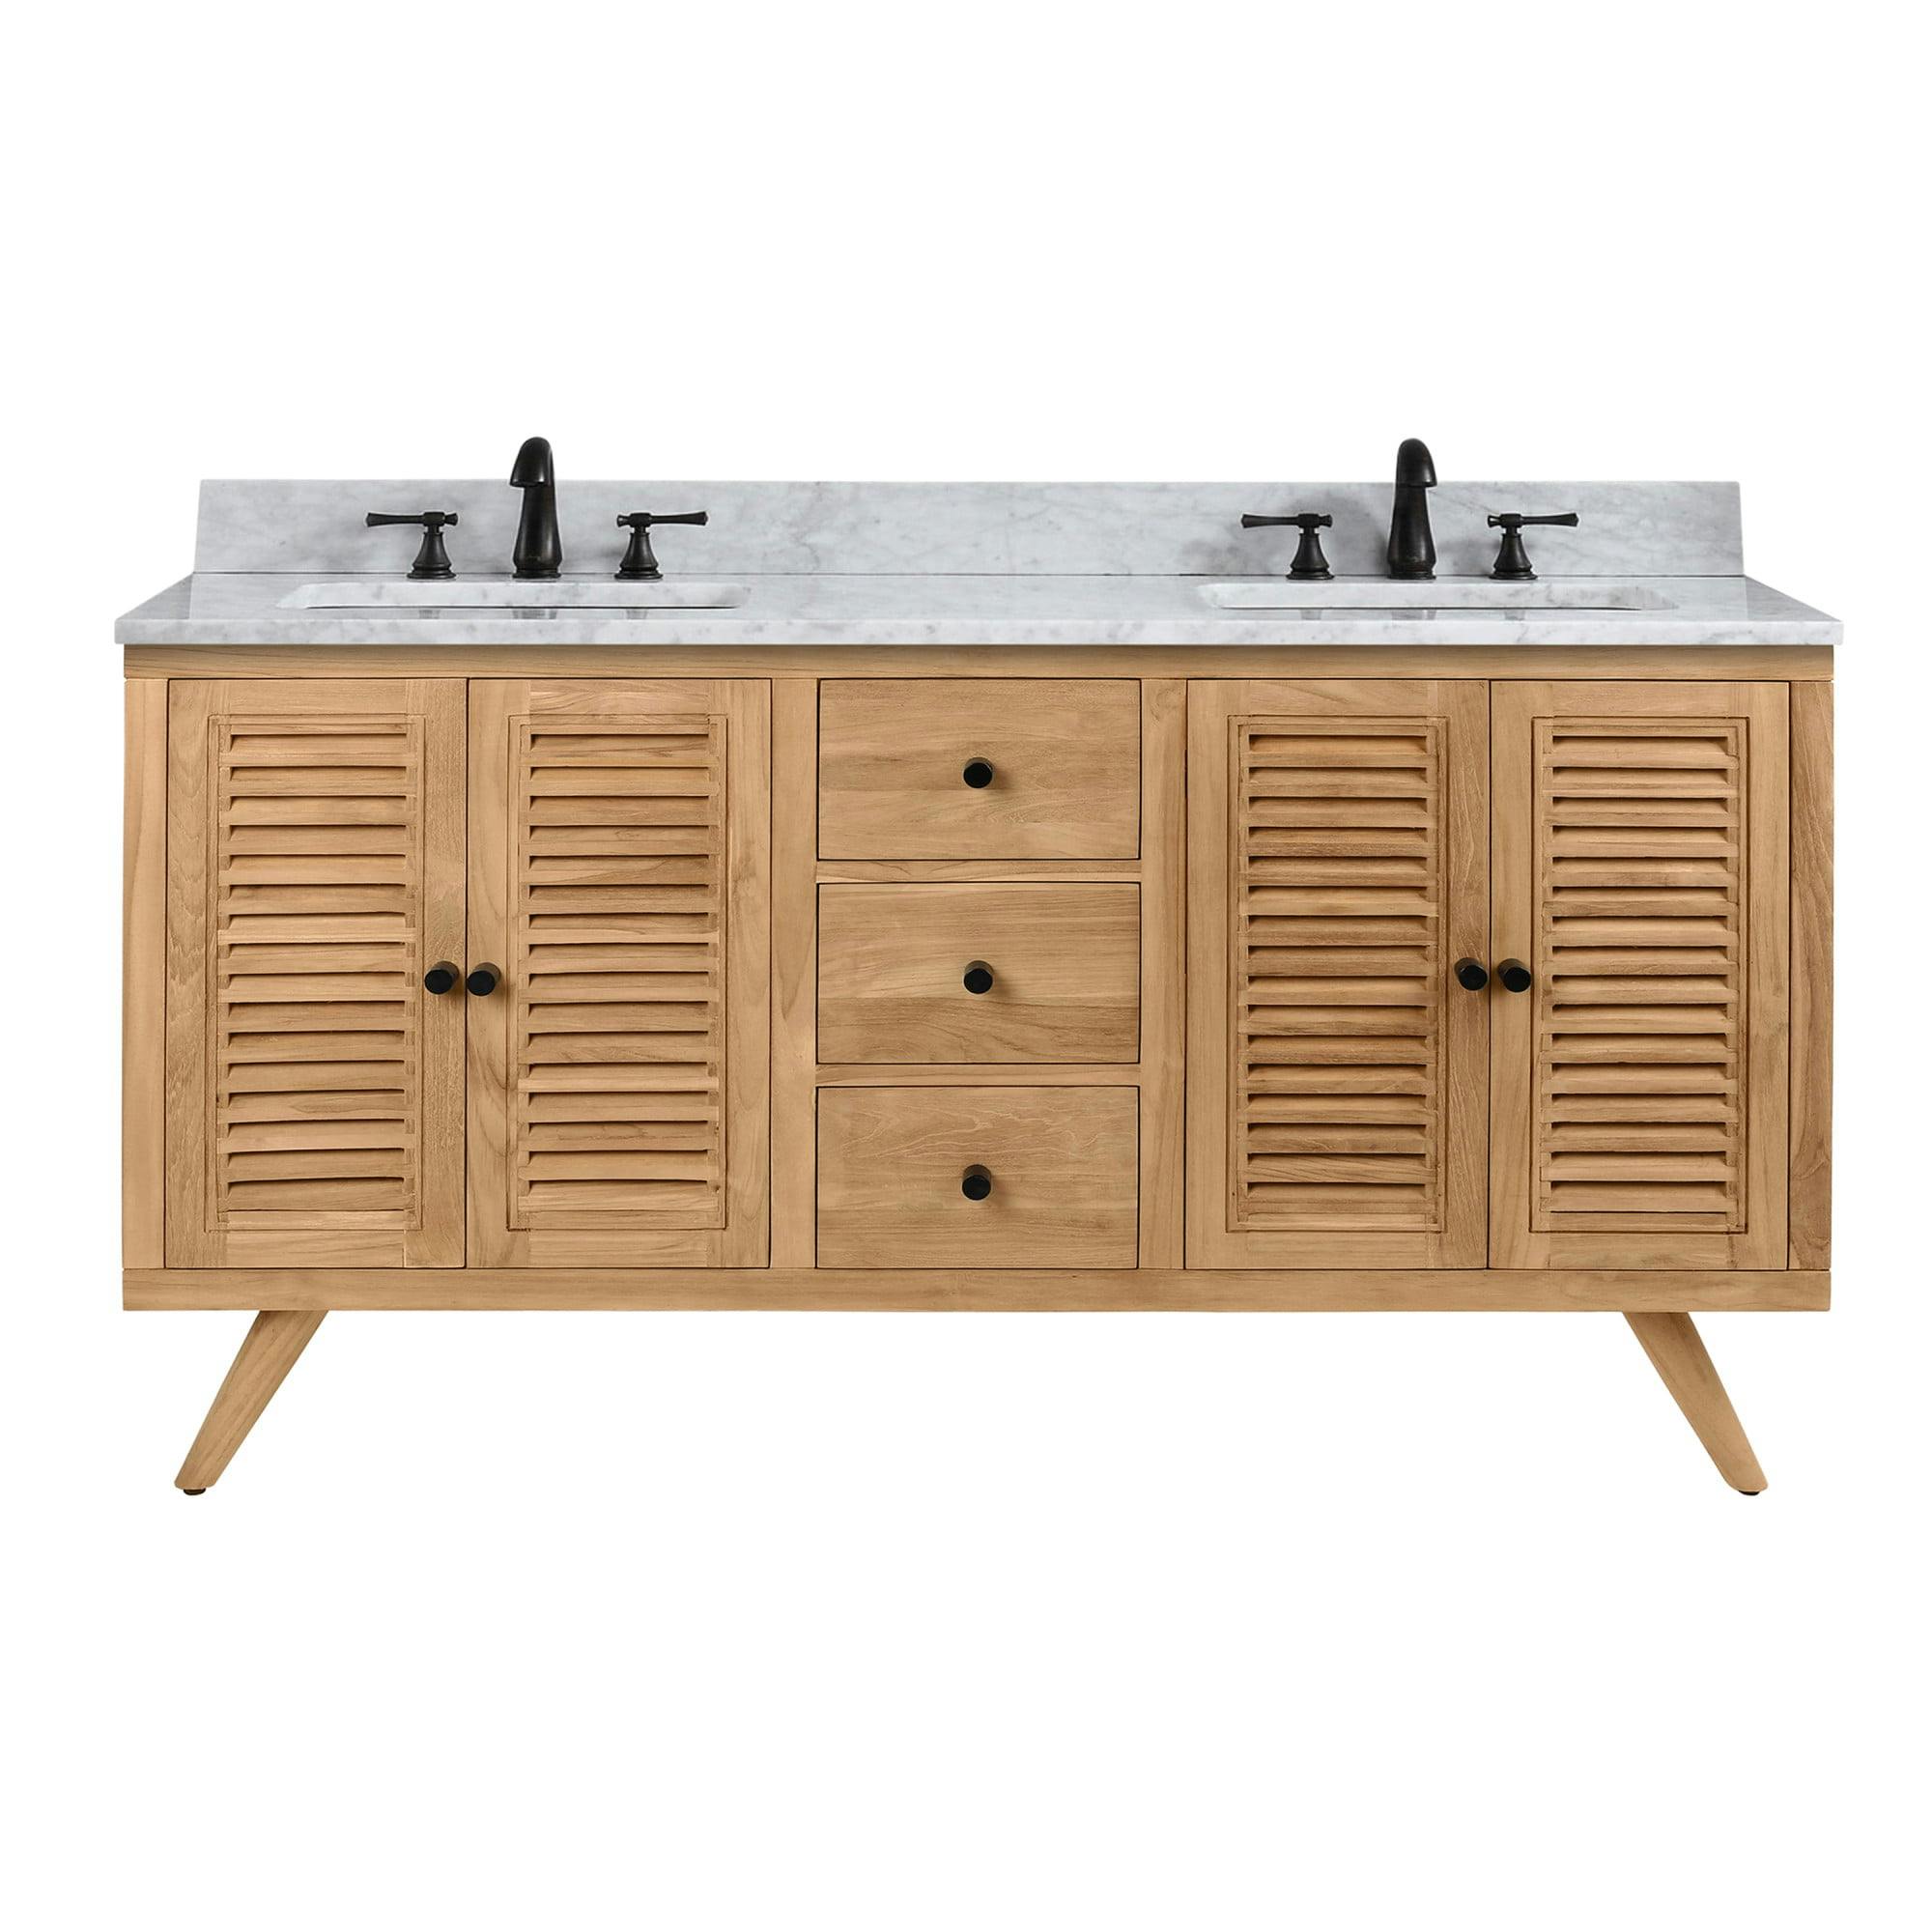 Transitional 61" Teak Double Vanity with Marble Top & Undermount Sinks